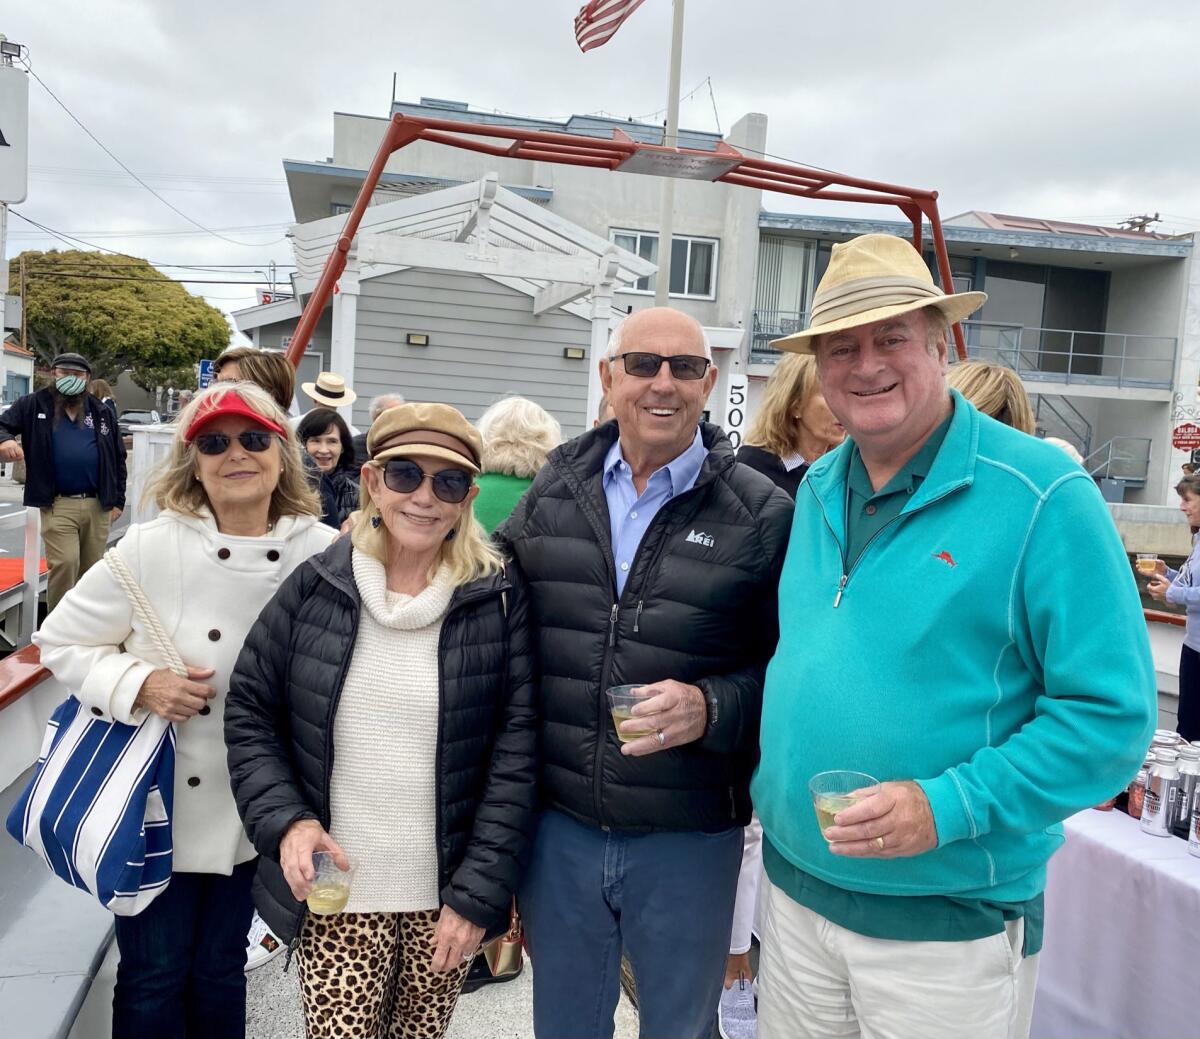 Karen Johnston, Janet Ray, Walkie Ray and Keith Curry ferry ride around Newport Harbor.